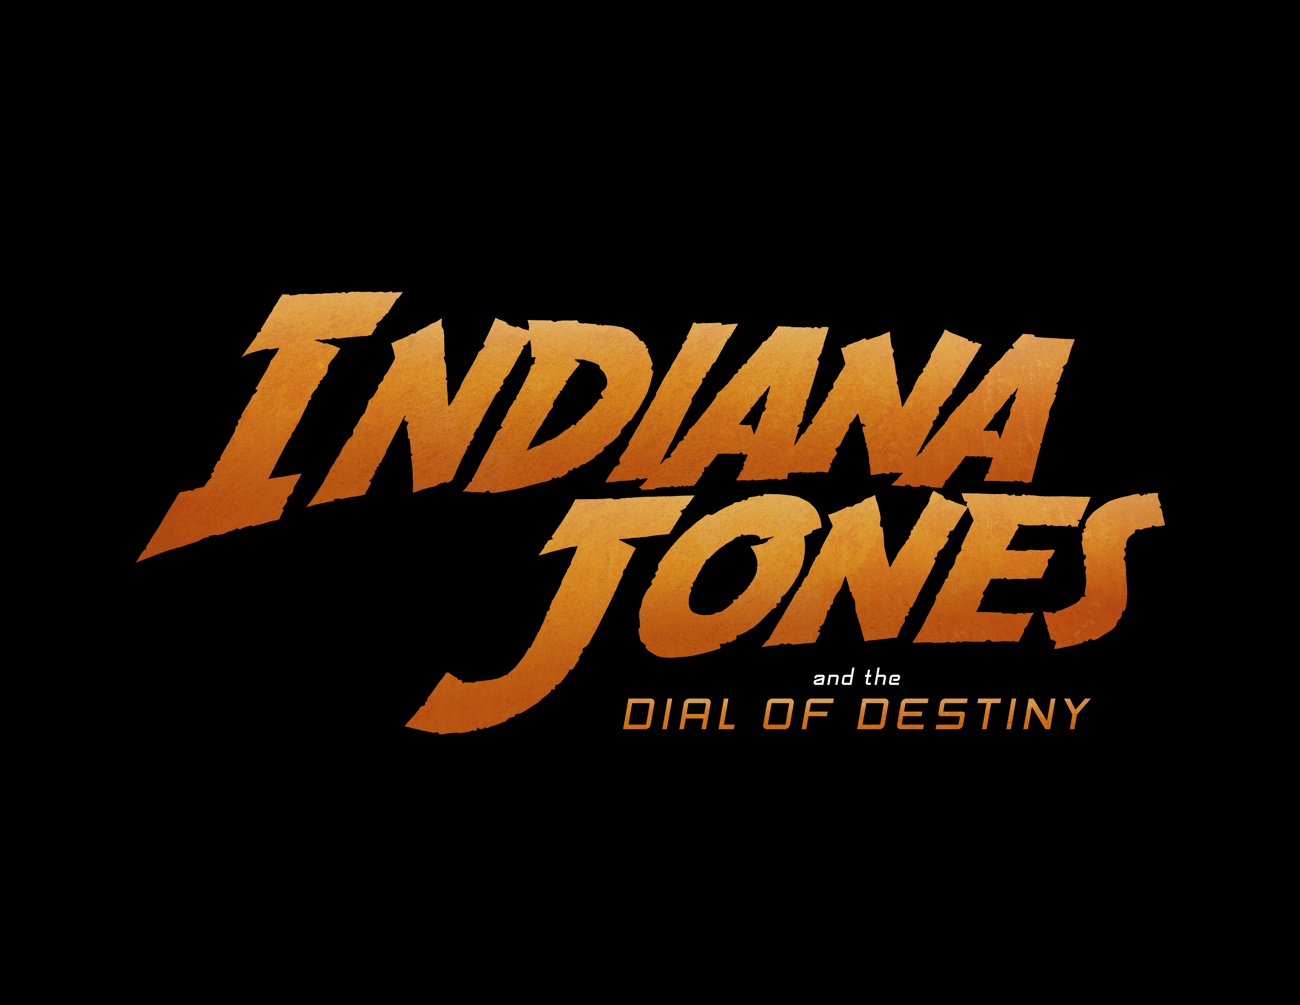 This will be the last adventure of Indiana Jones, the iconic hero played by Harrison Ford